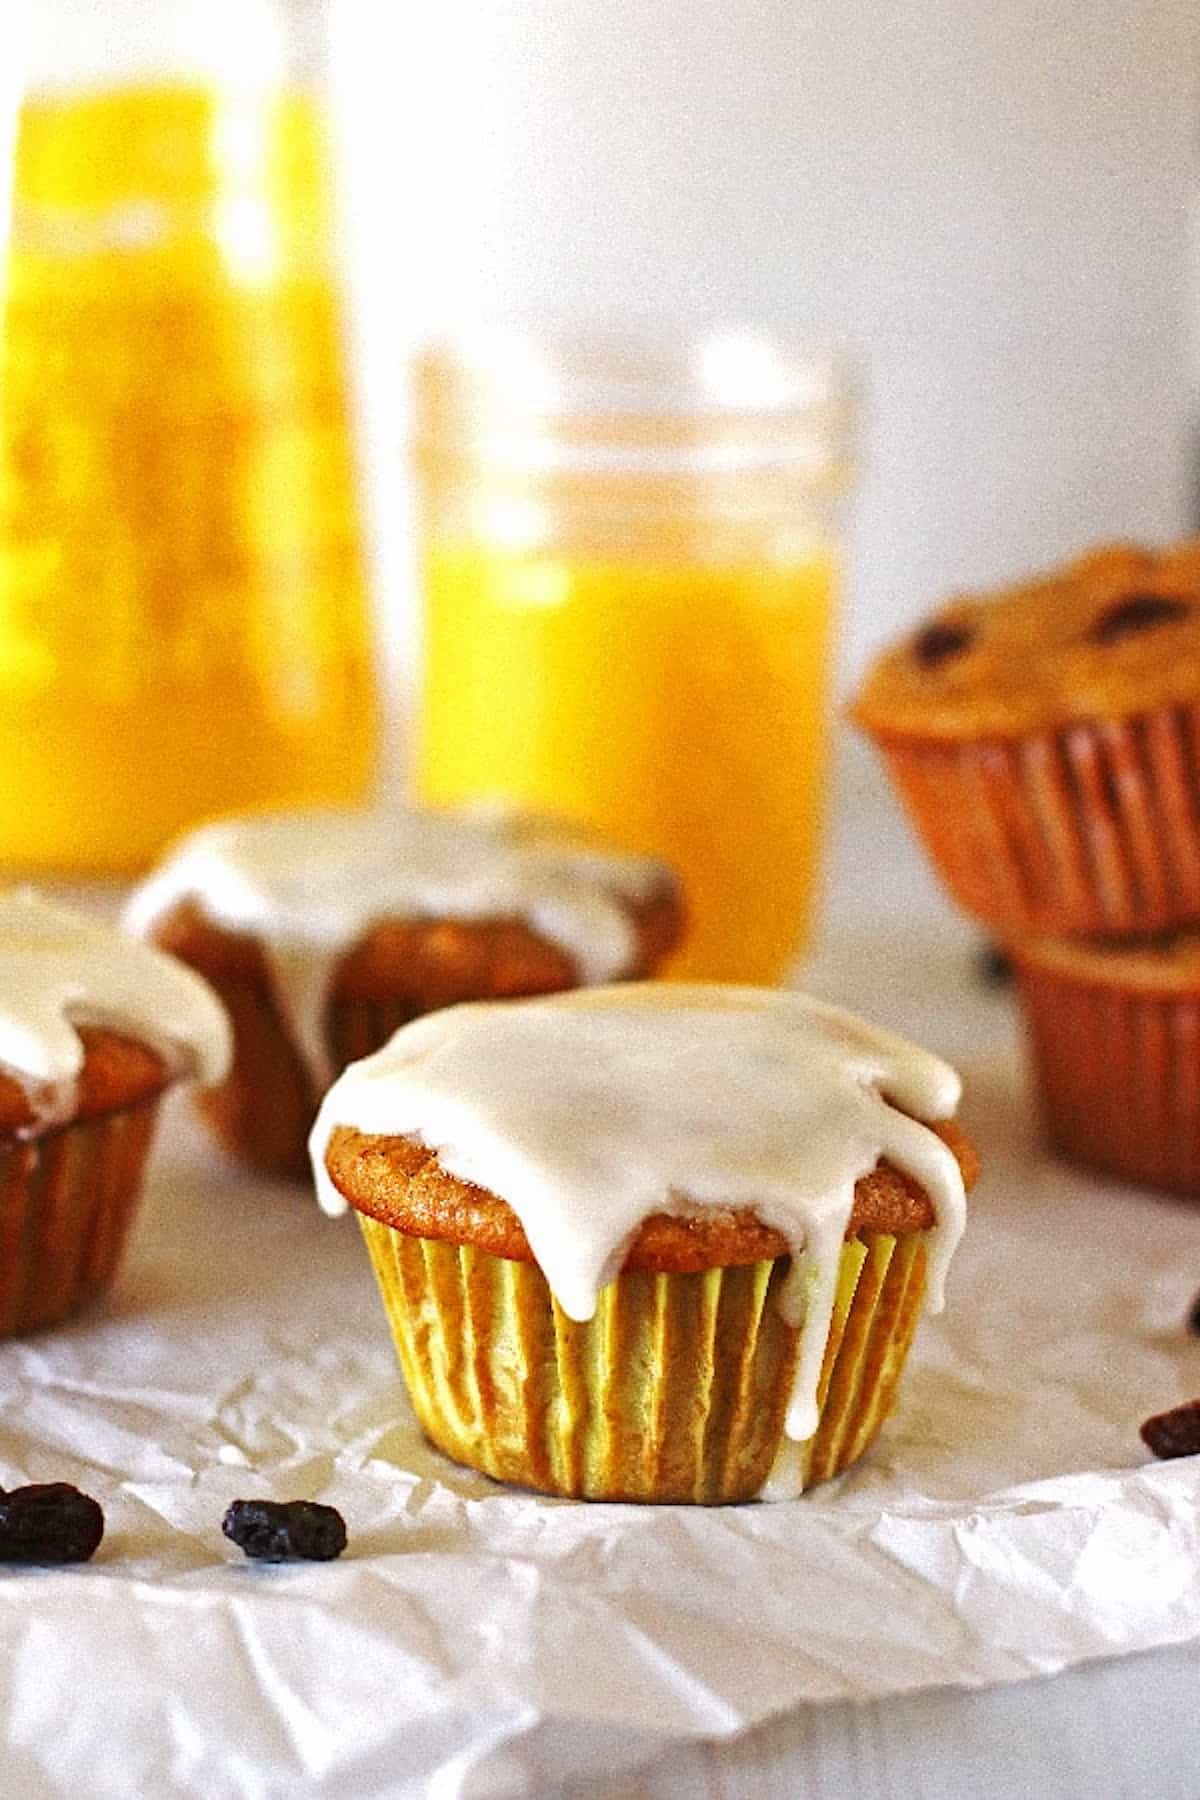 Muffins on a table with a glass of orange juice